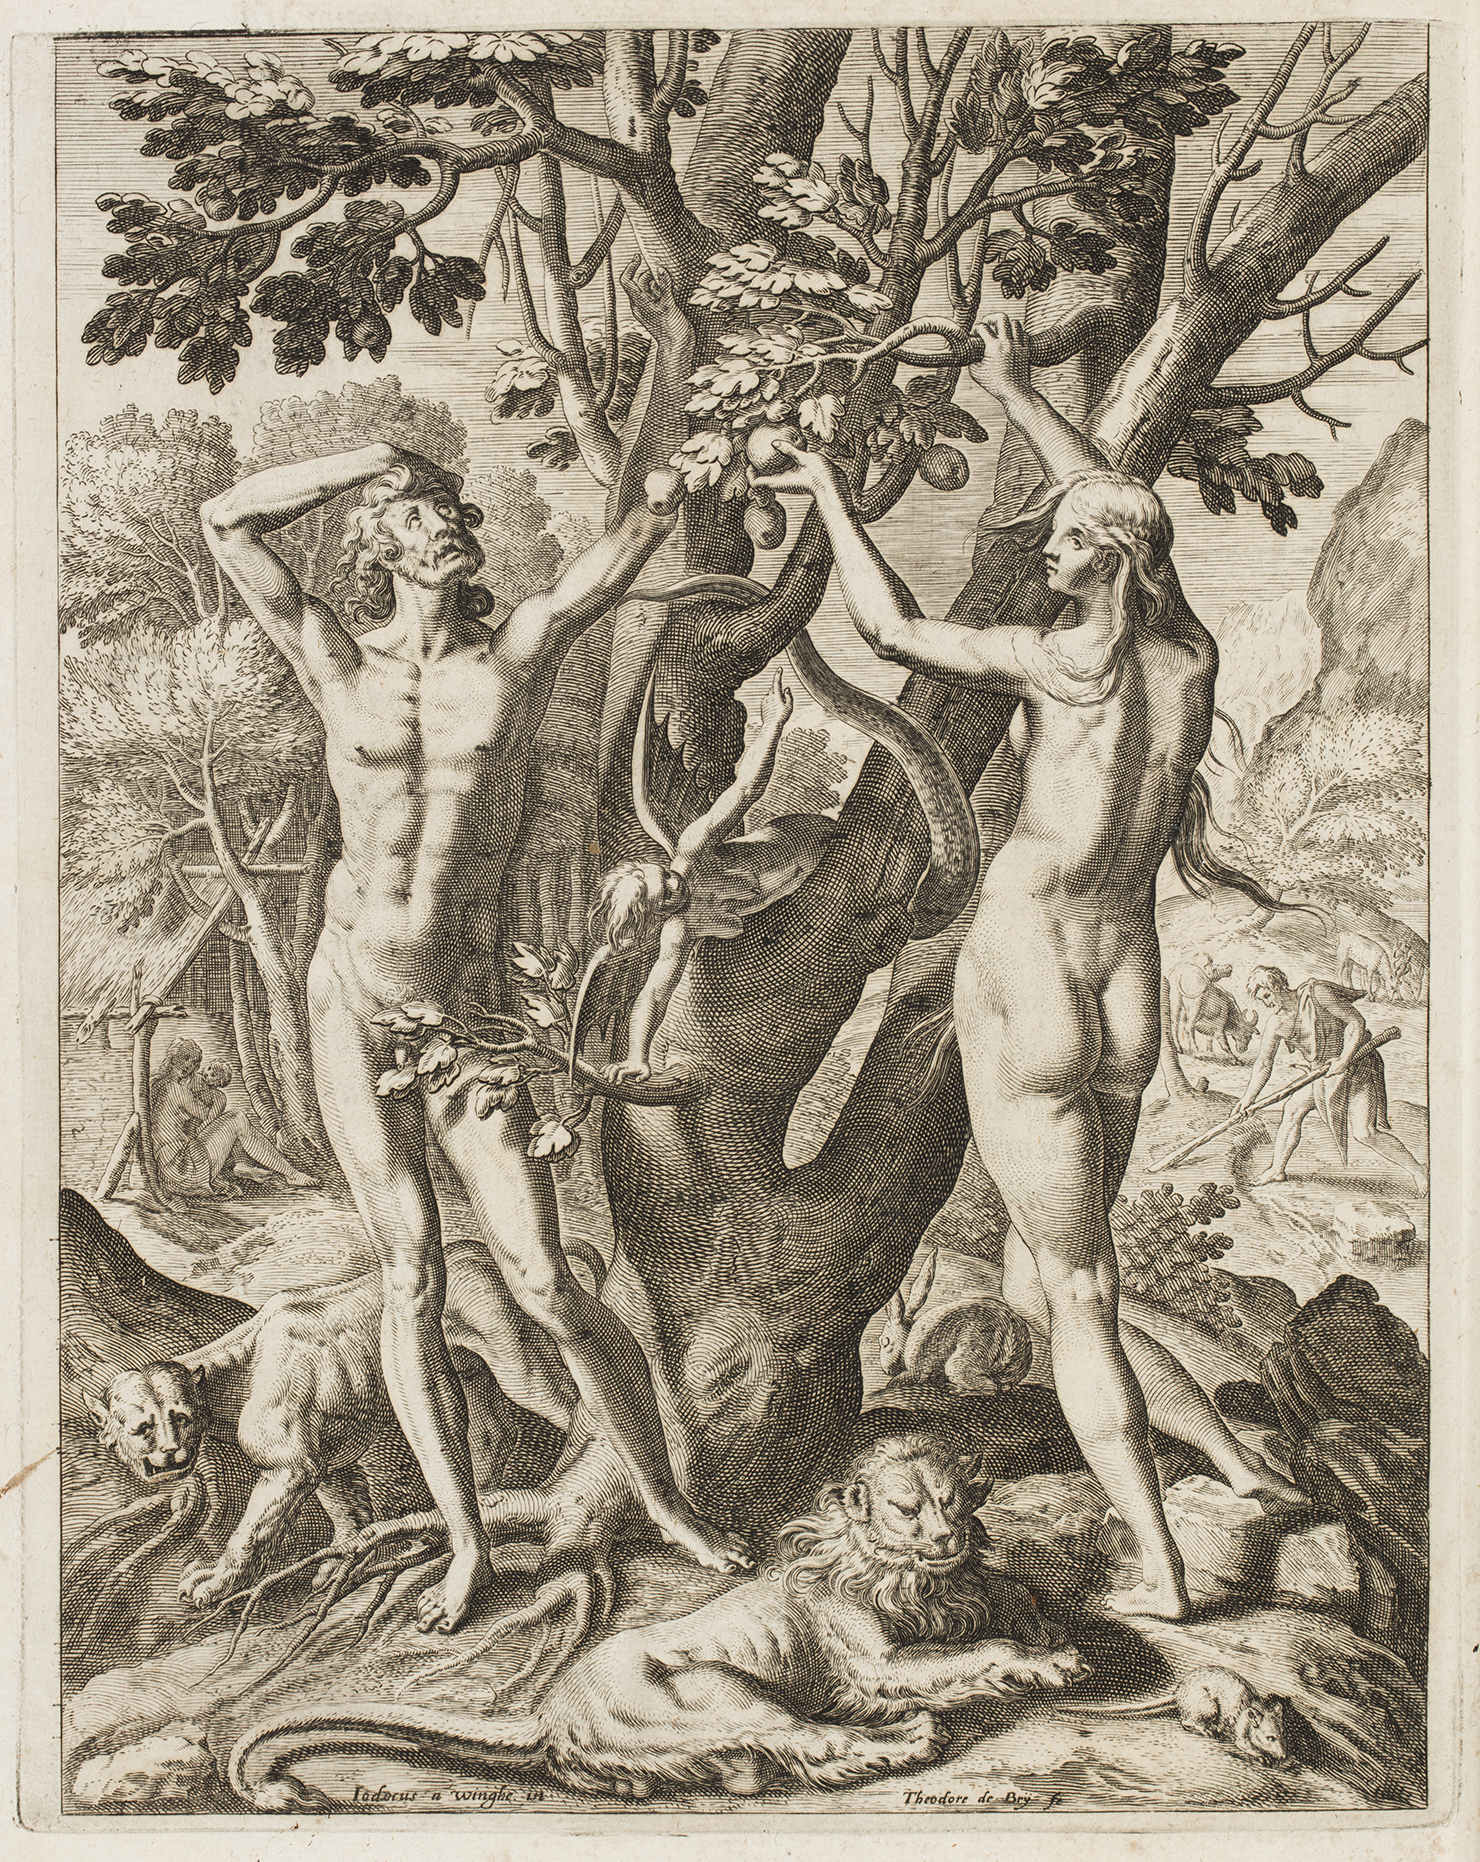 Black and white engraving of a naked man and woman reaching to pick and apple from a tree.